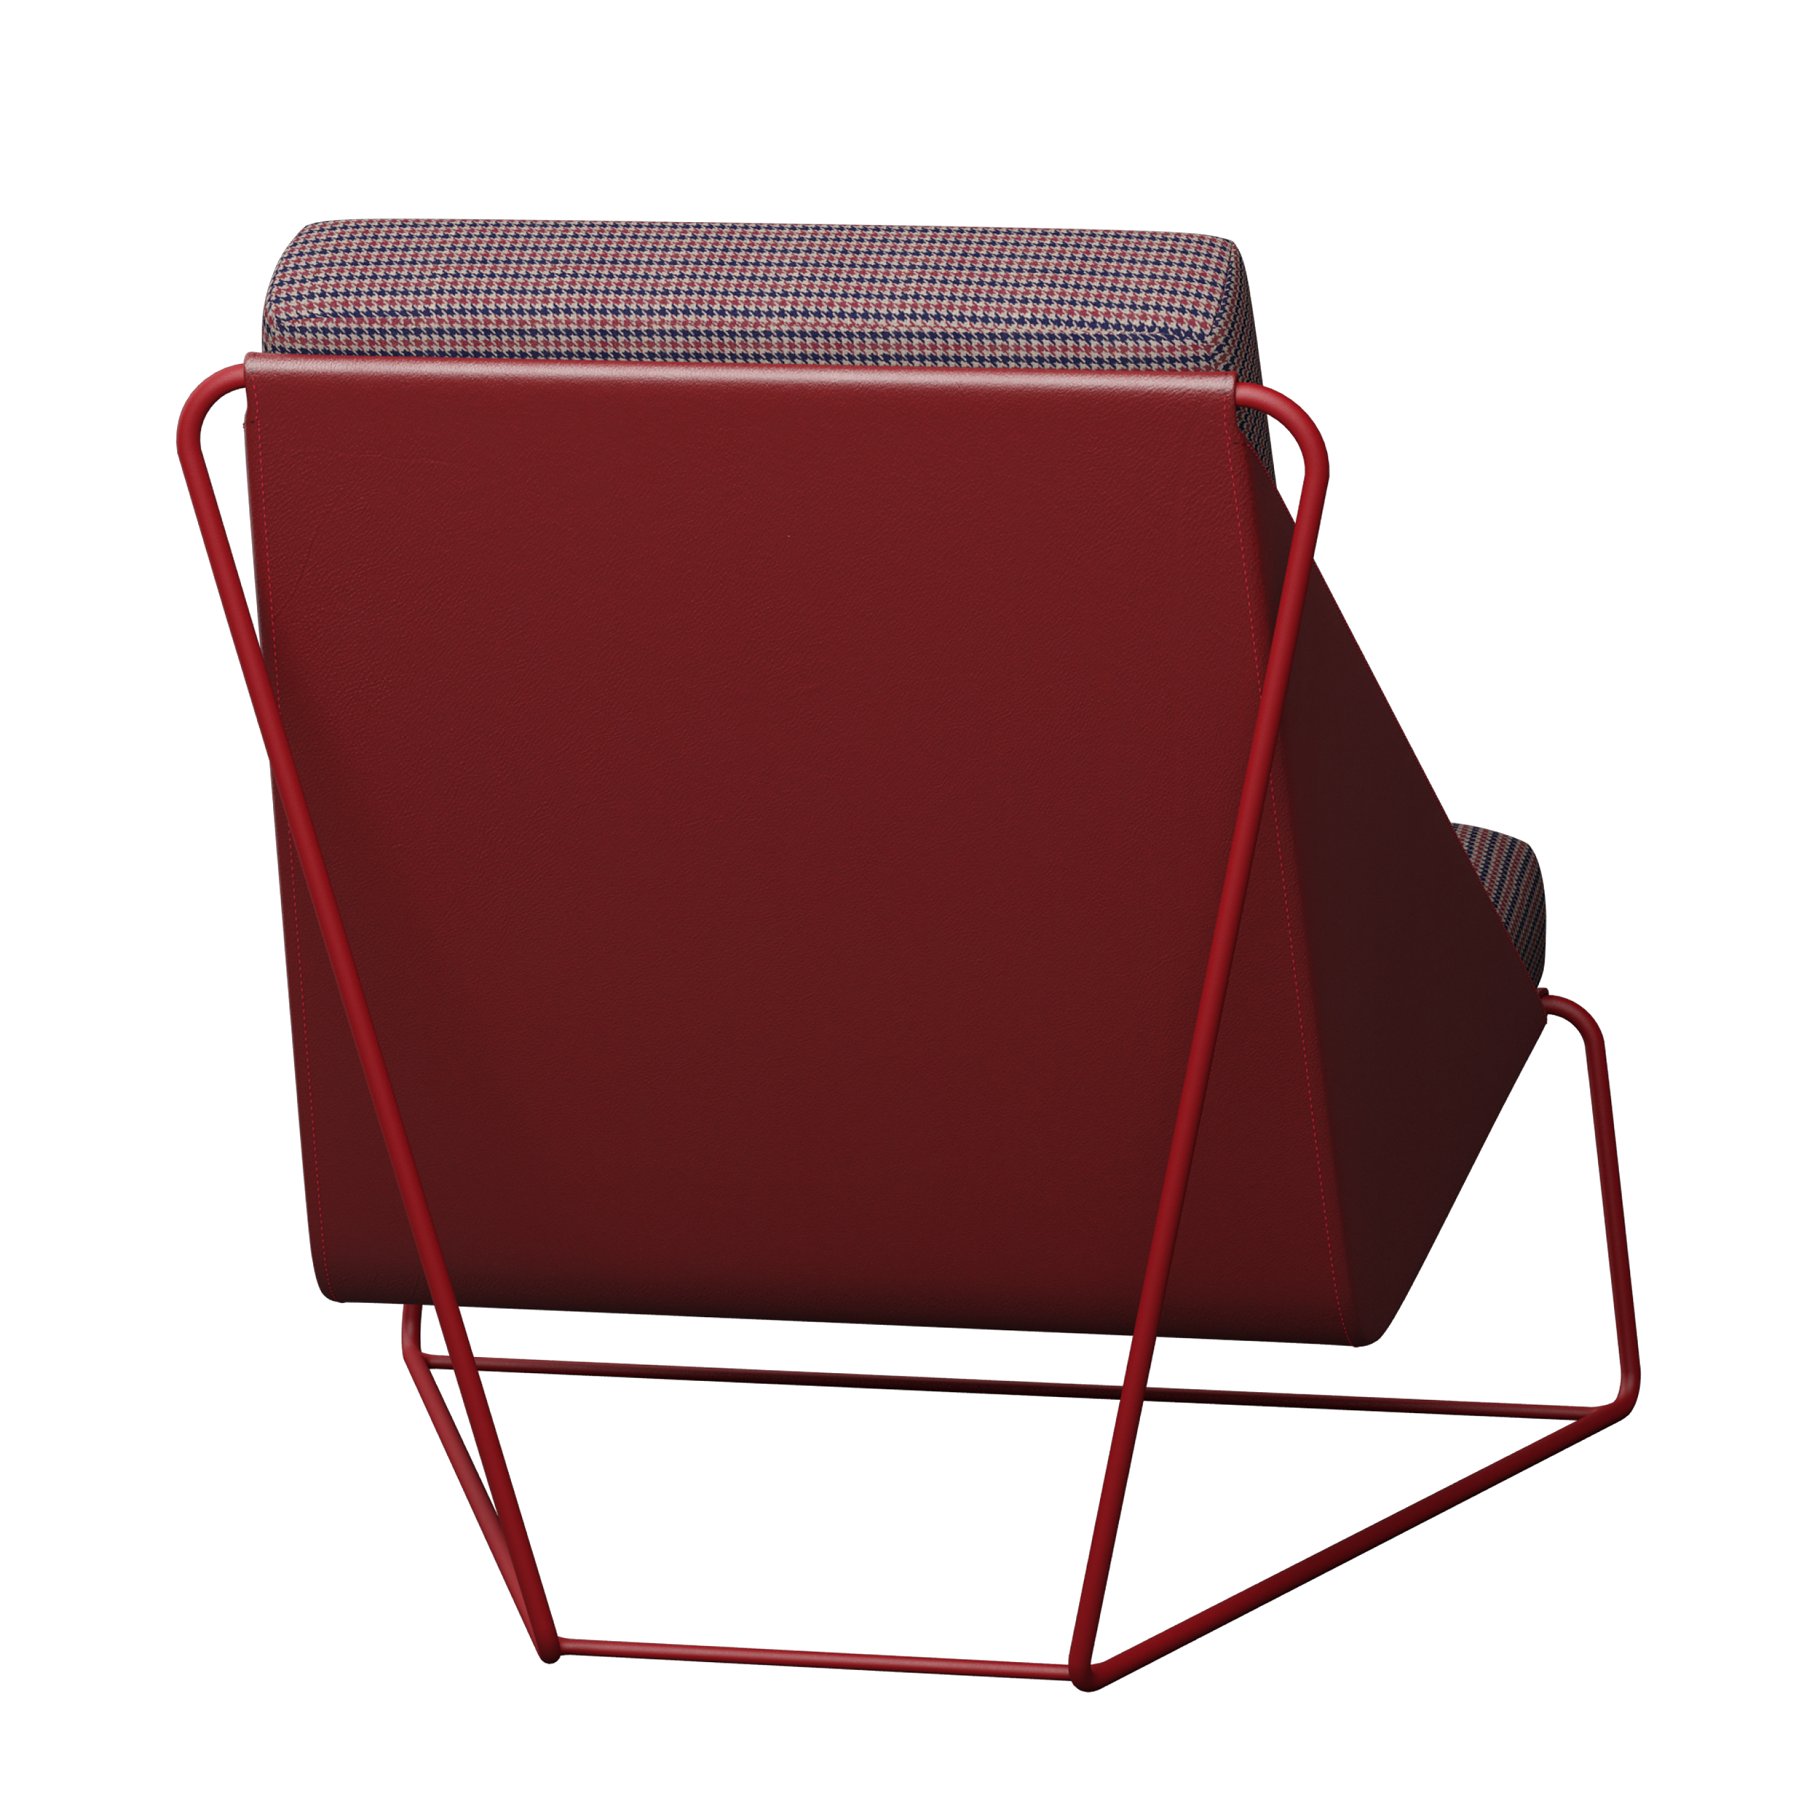 Rendering of a gorgeous 3d model of a red chair back view